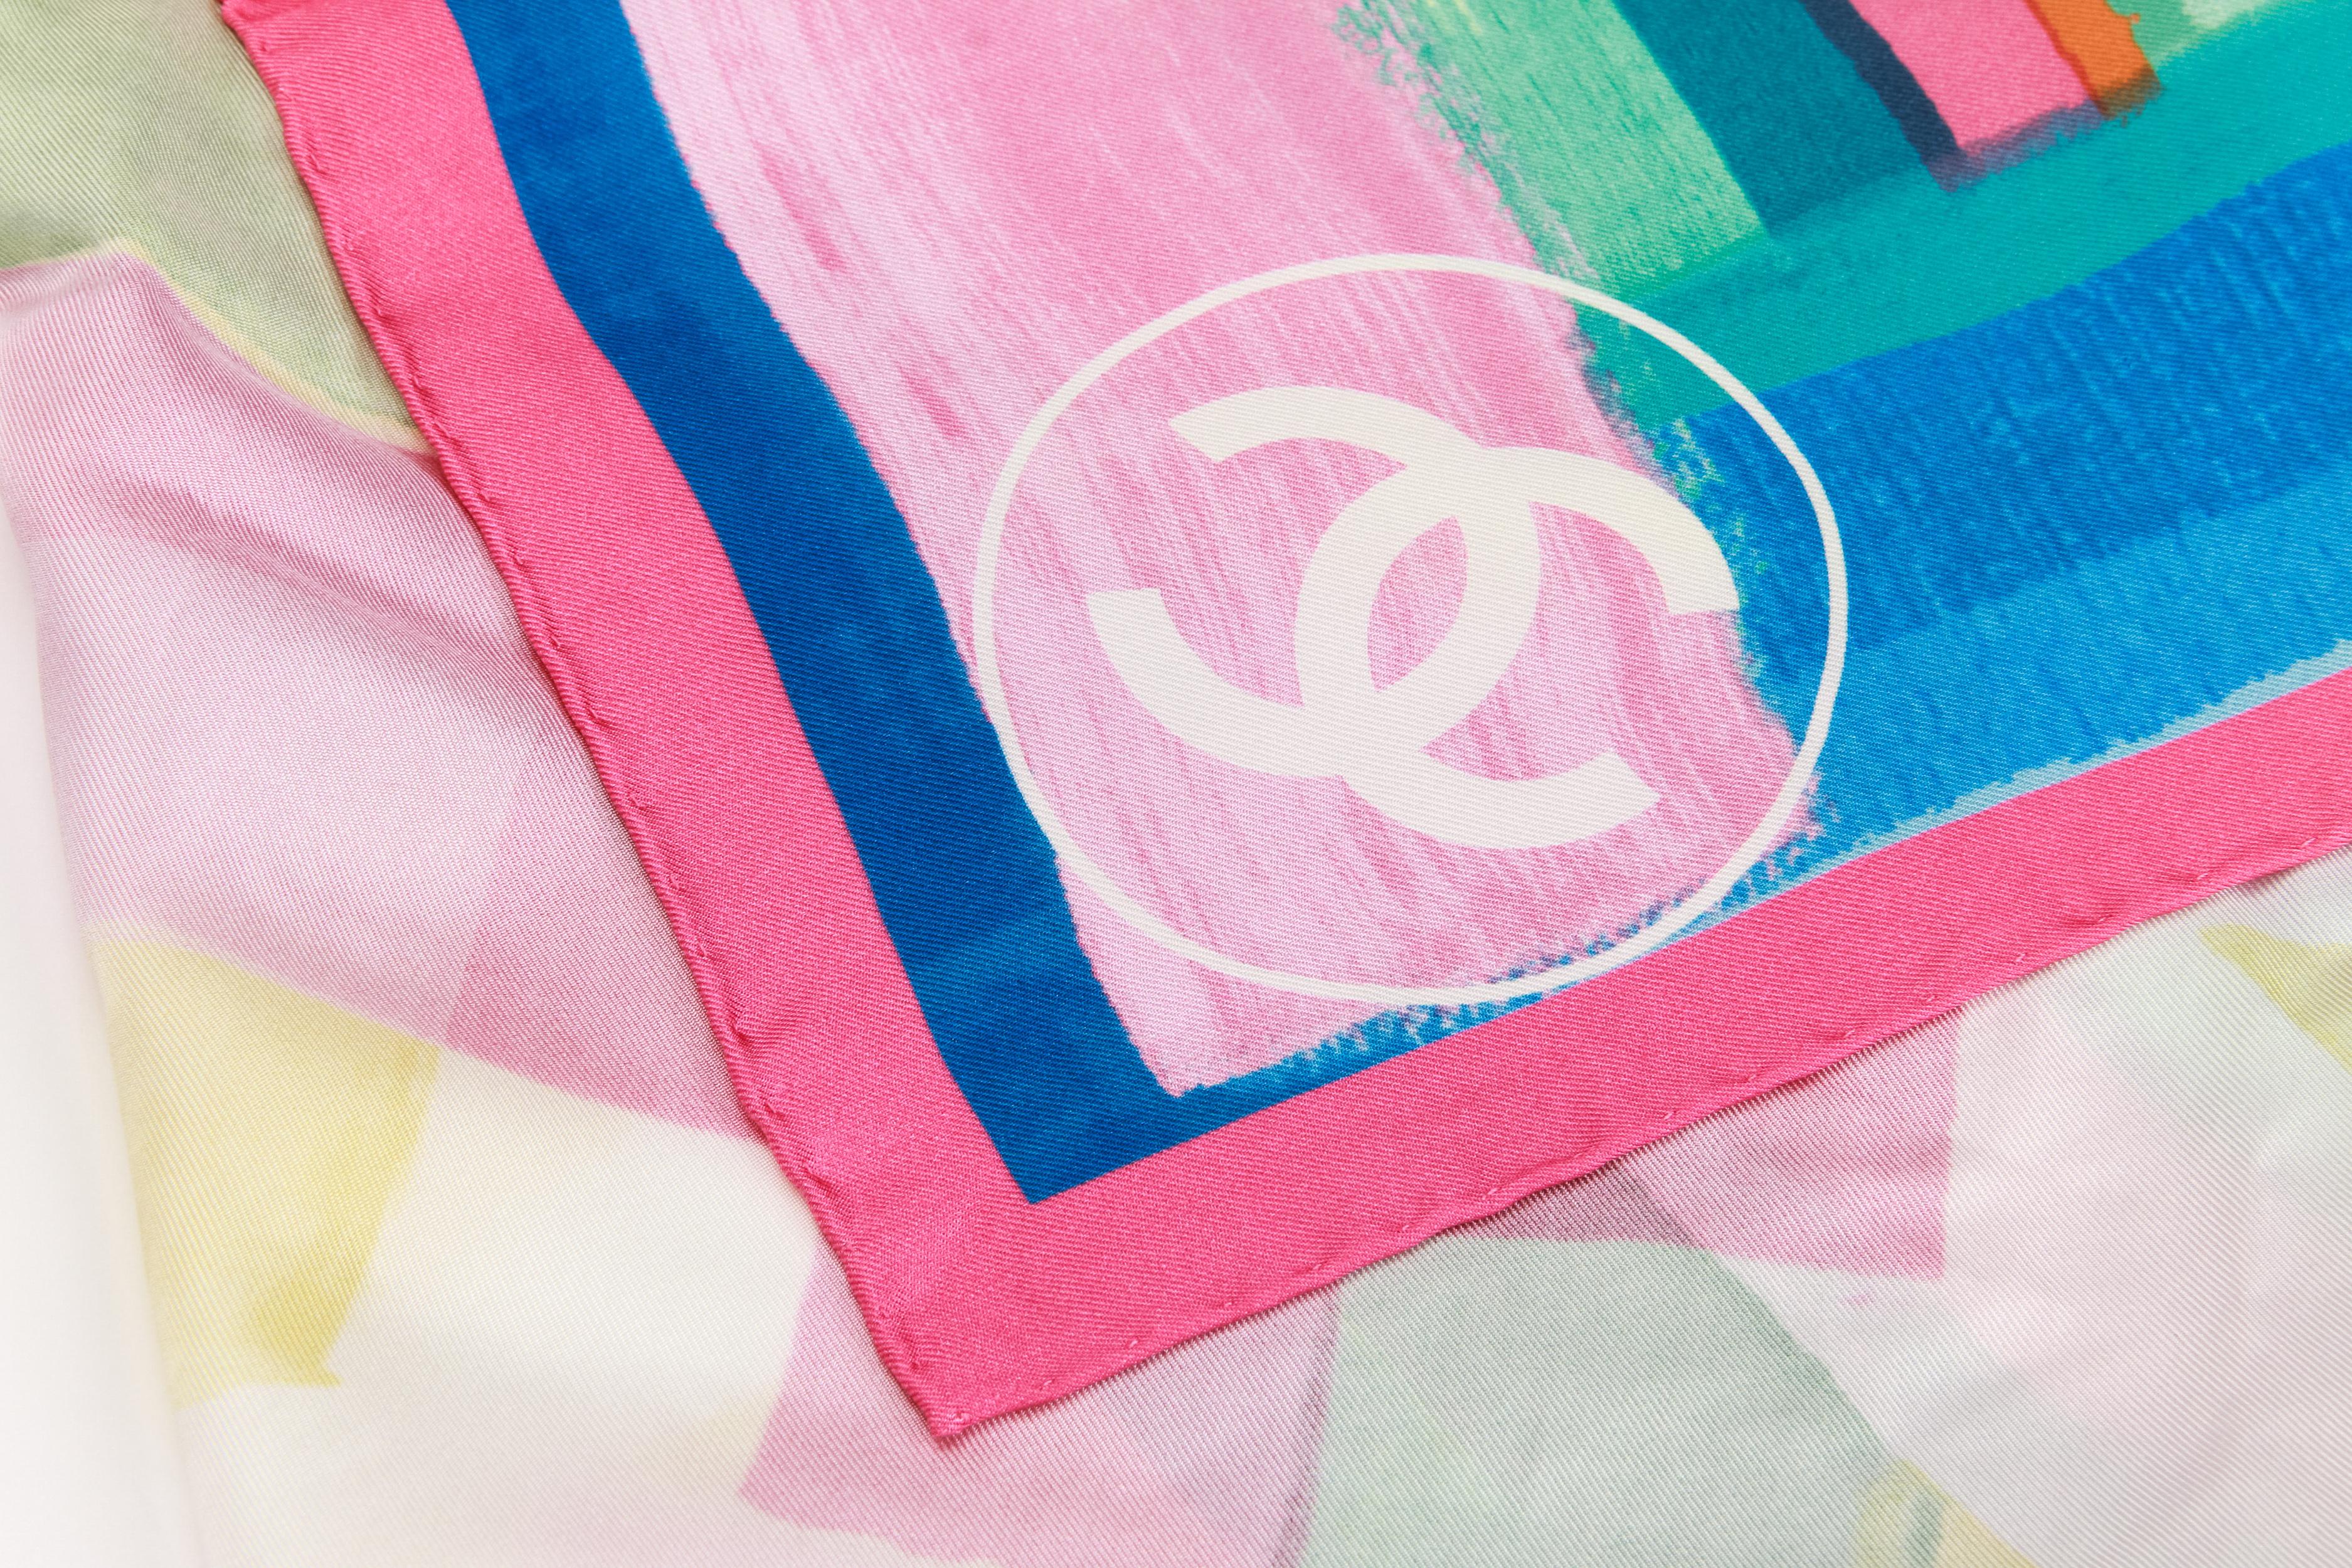 Chanel excellent condition Coco Cuba pink and blue silk scarf.
100% Silk
35